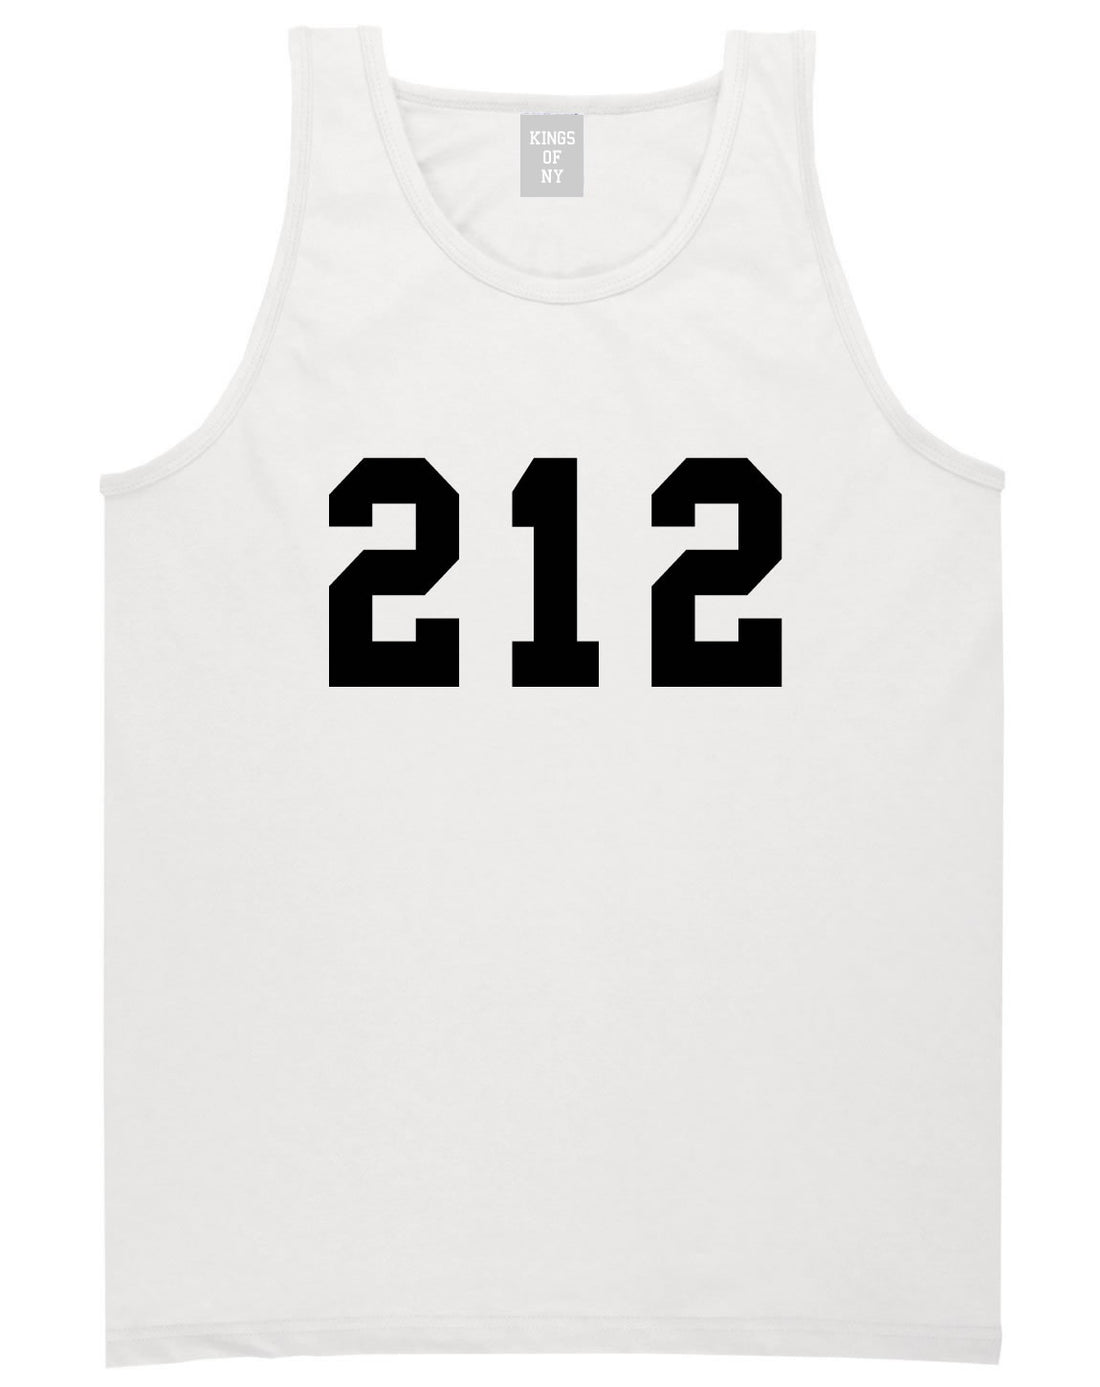 212 New York Area Code Tank Top in White By Kings Of NY